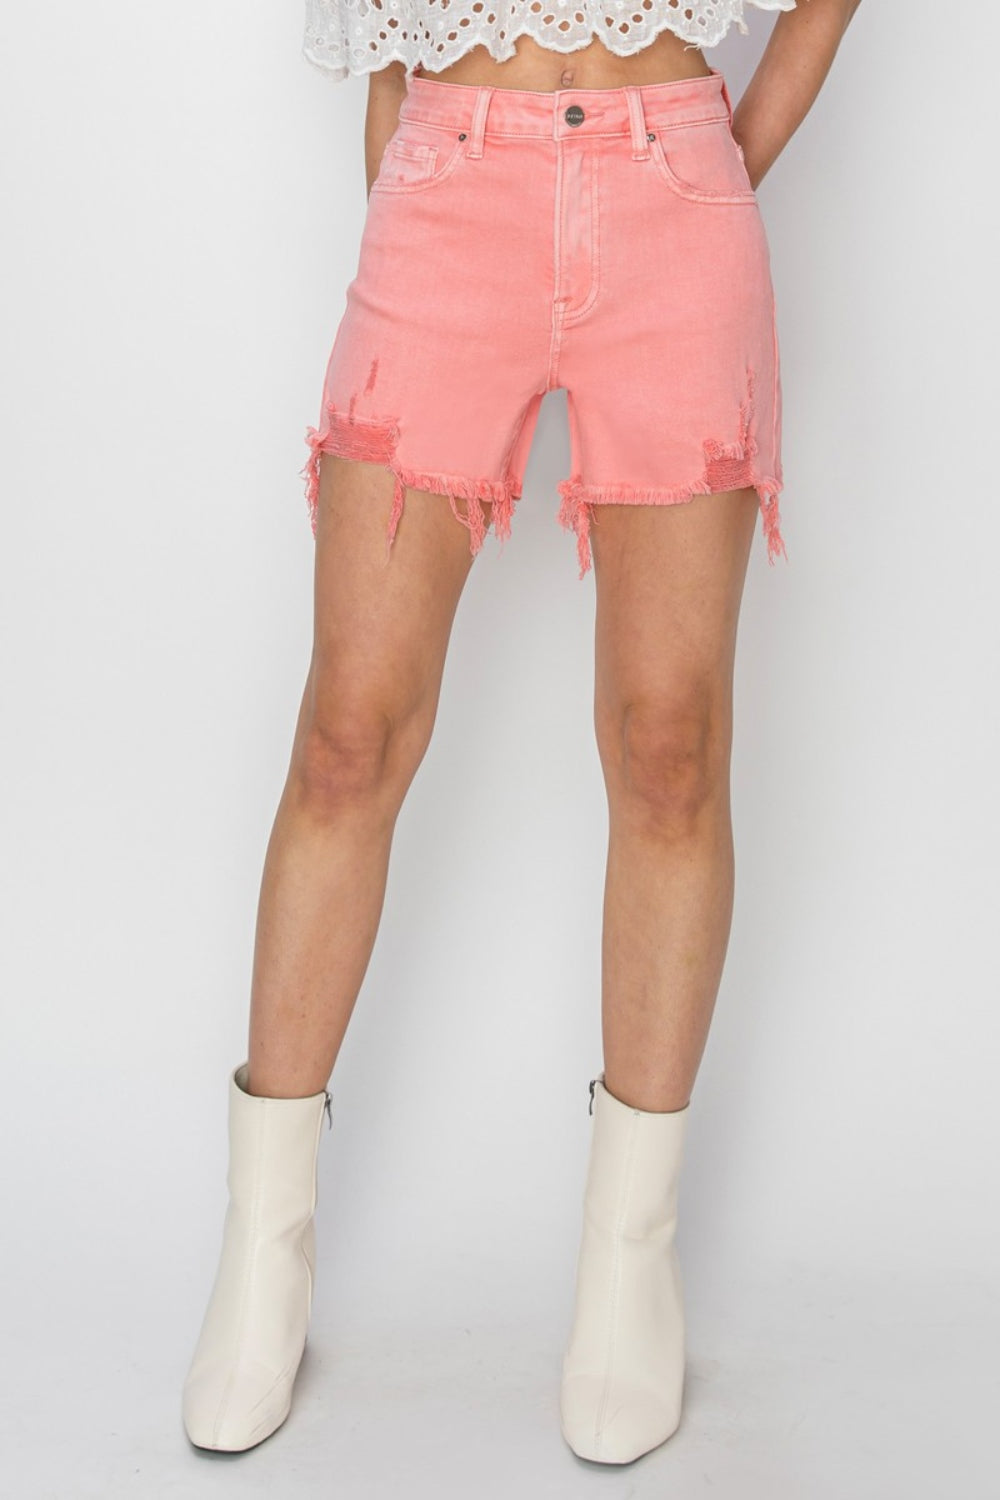 Sure! High Rise Distressed Denim Shorts are the perfect combination of style and edge. With a flattering high waist and distressed detailing, these shorts are sure to make a statement. Pair them with a graphic tee for a casual look, or dress them up with a blouse and heels for a night out. S-XL